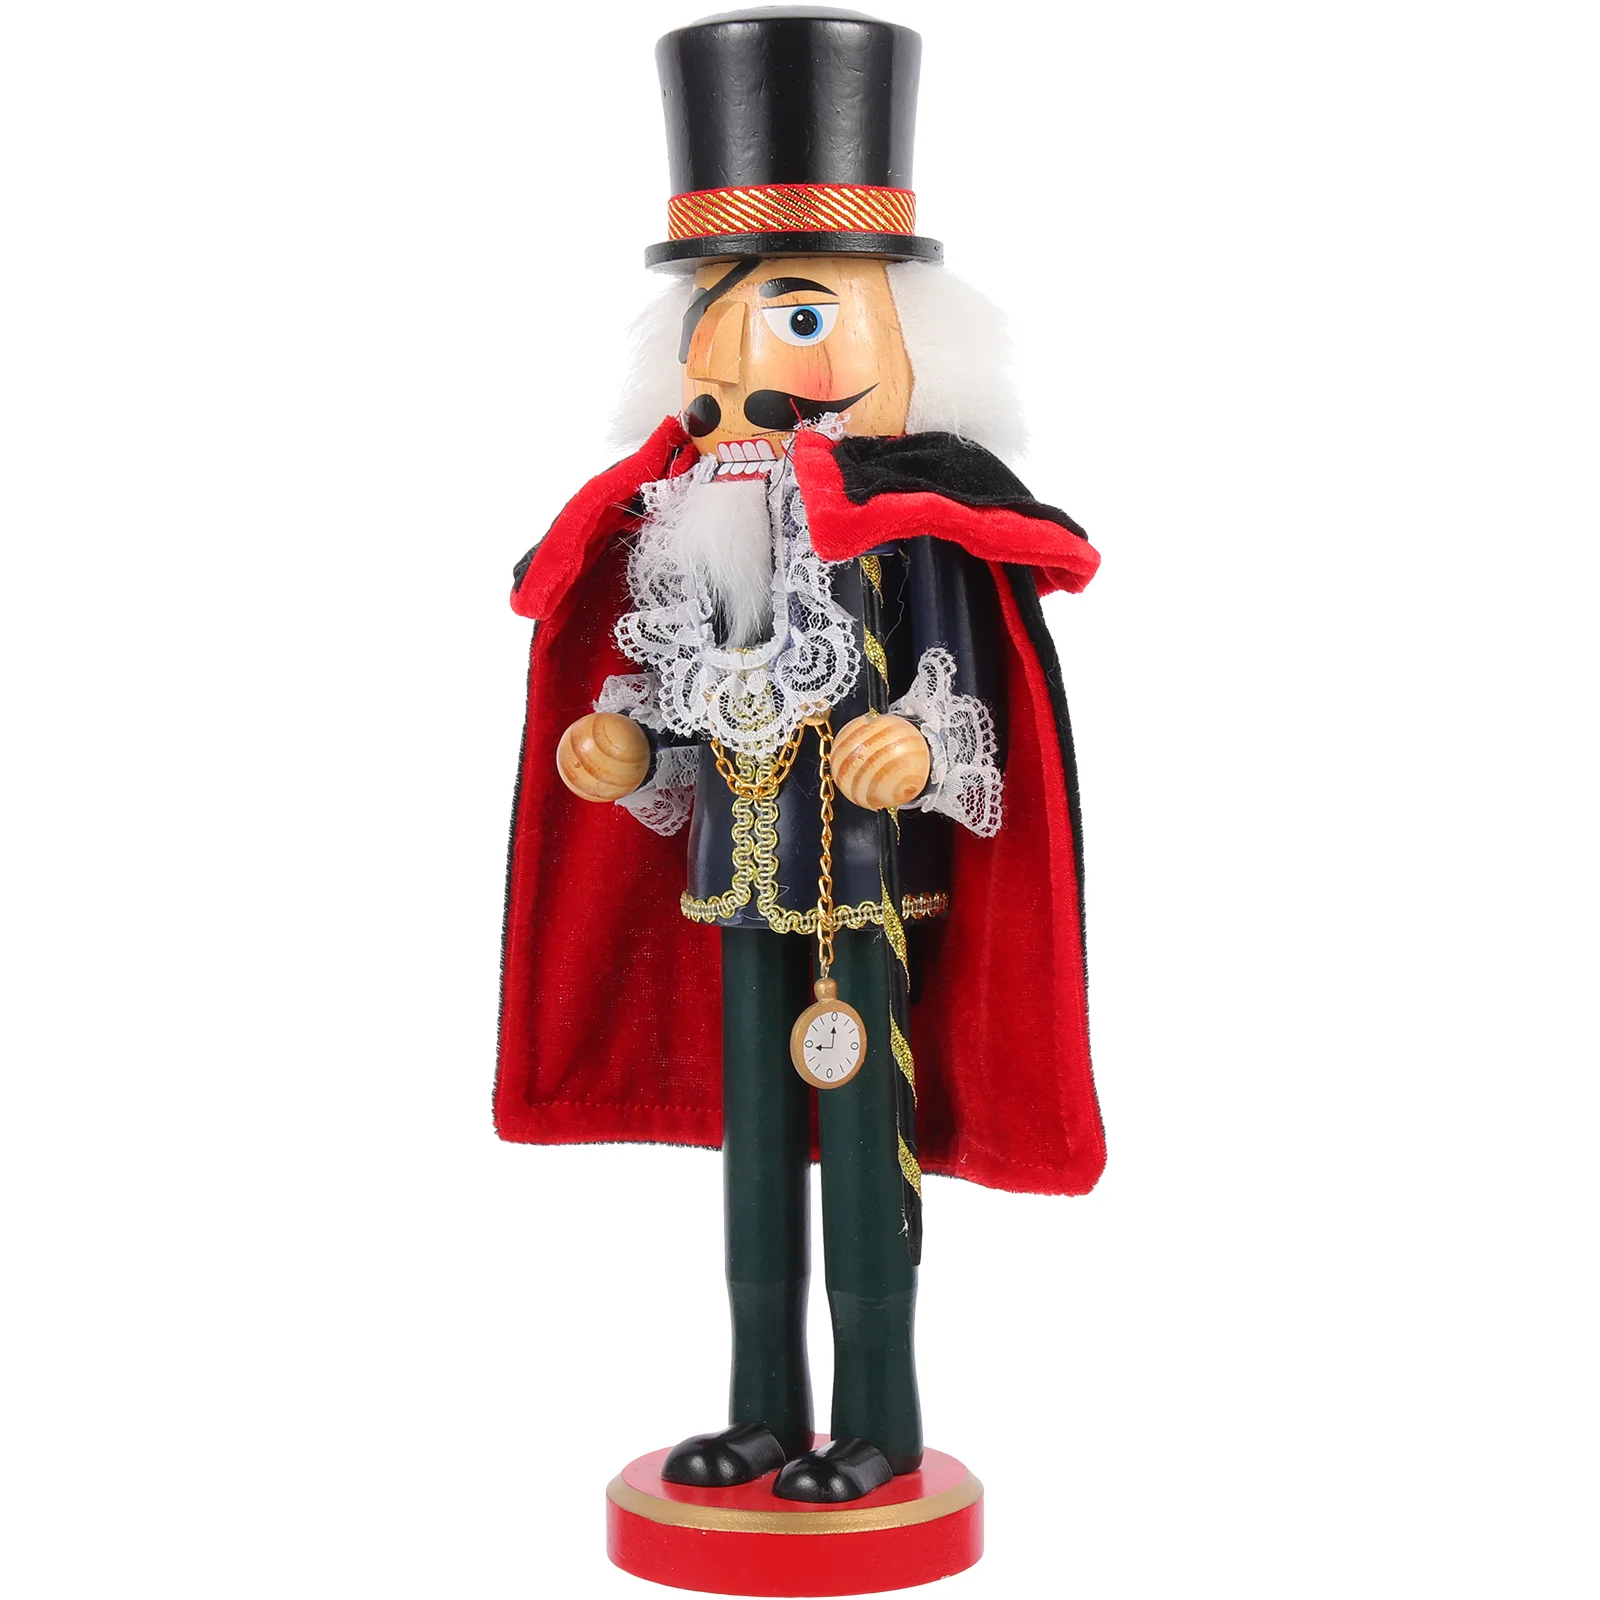 

Pirate Nutcracker Festival Nutcrackers Wooden Craft Traditional Holiday Decorations Desktop Kids Outdoor Toys Christmas